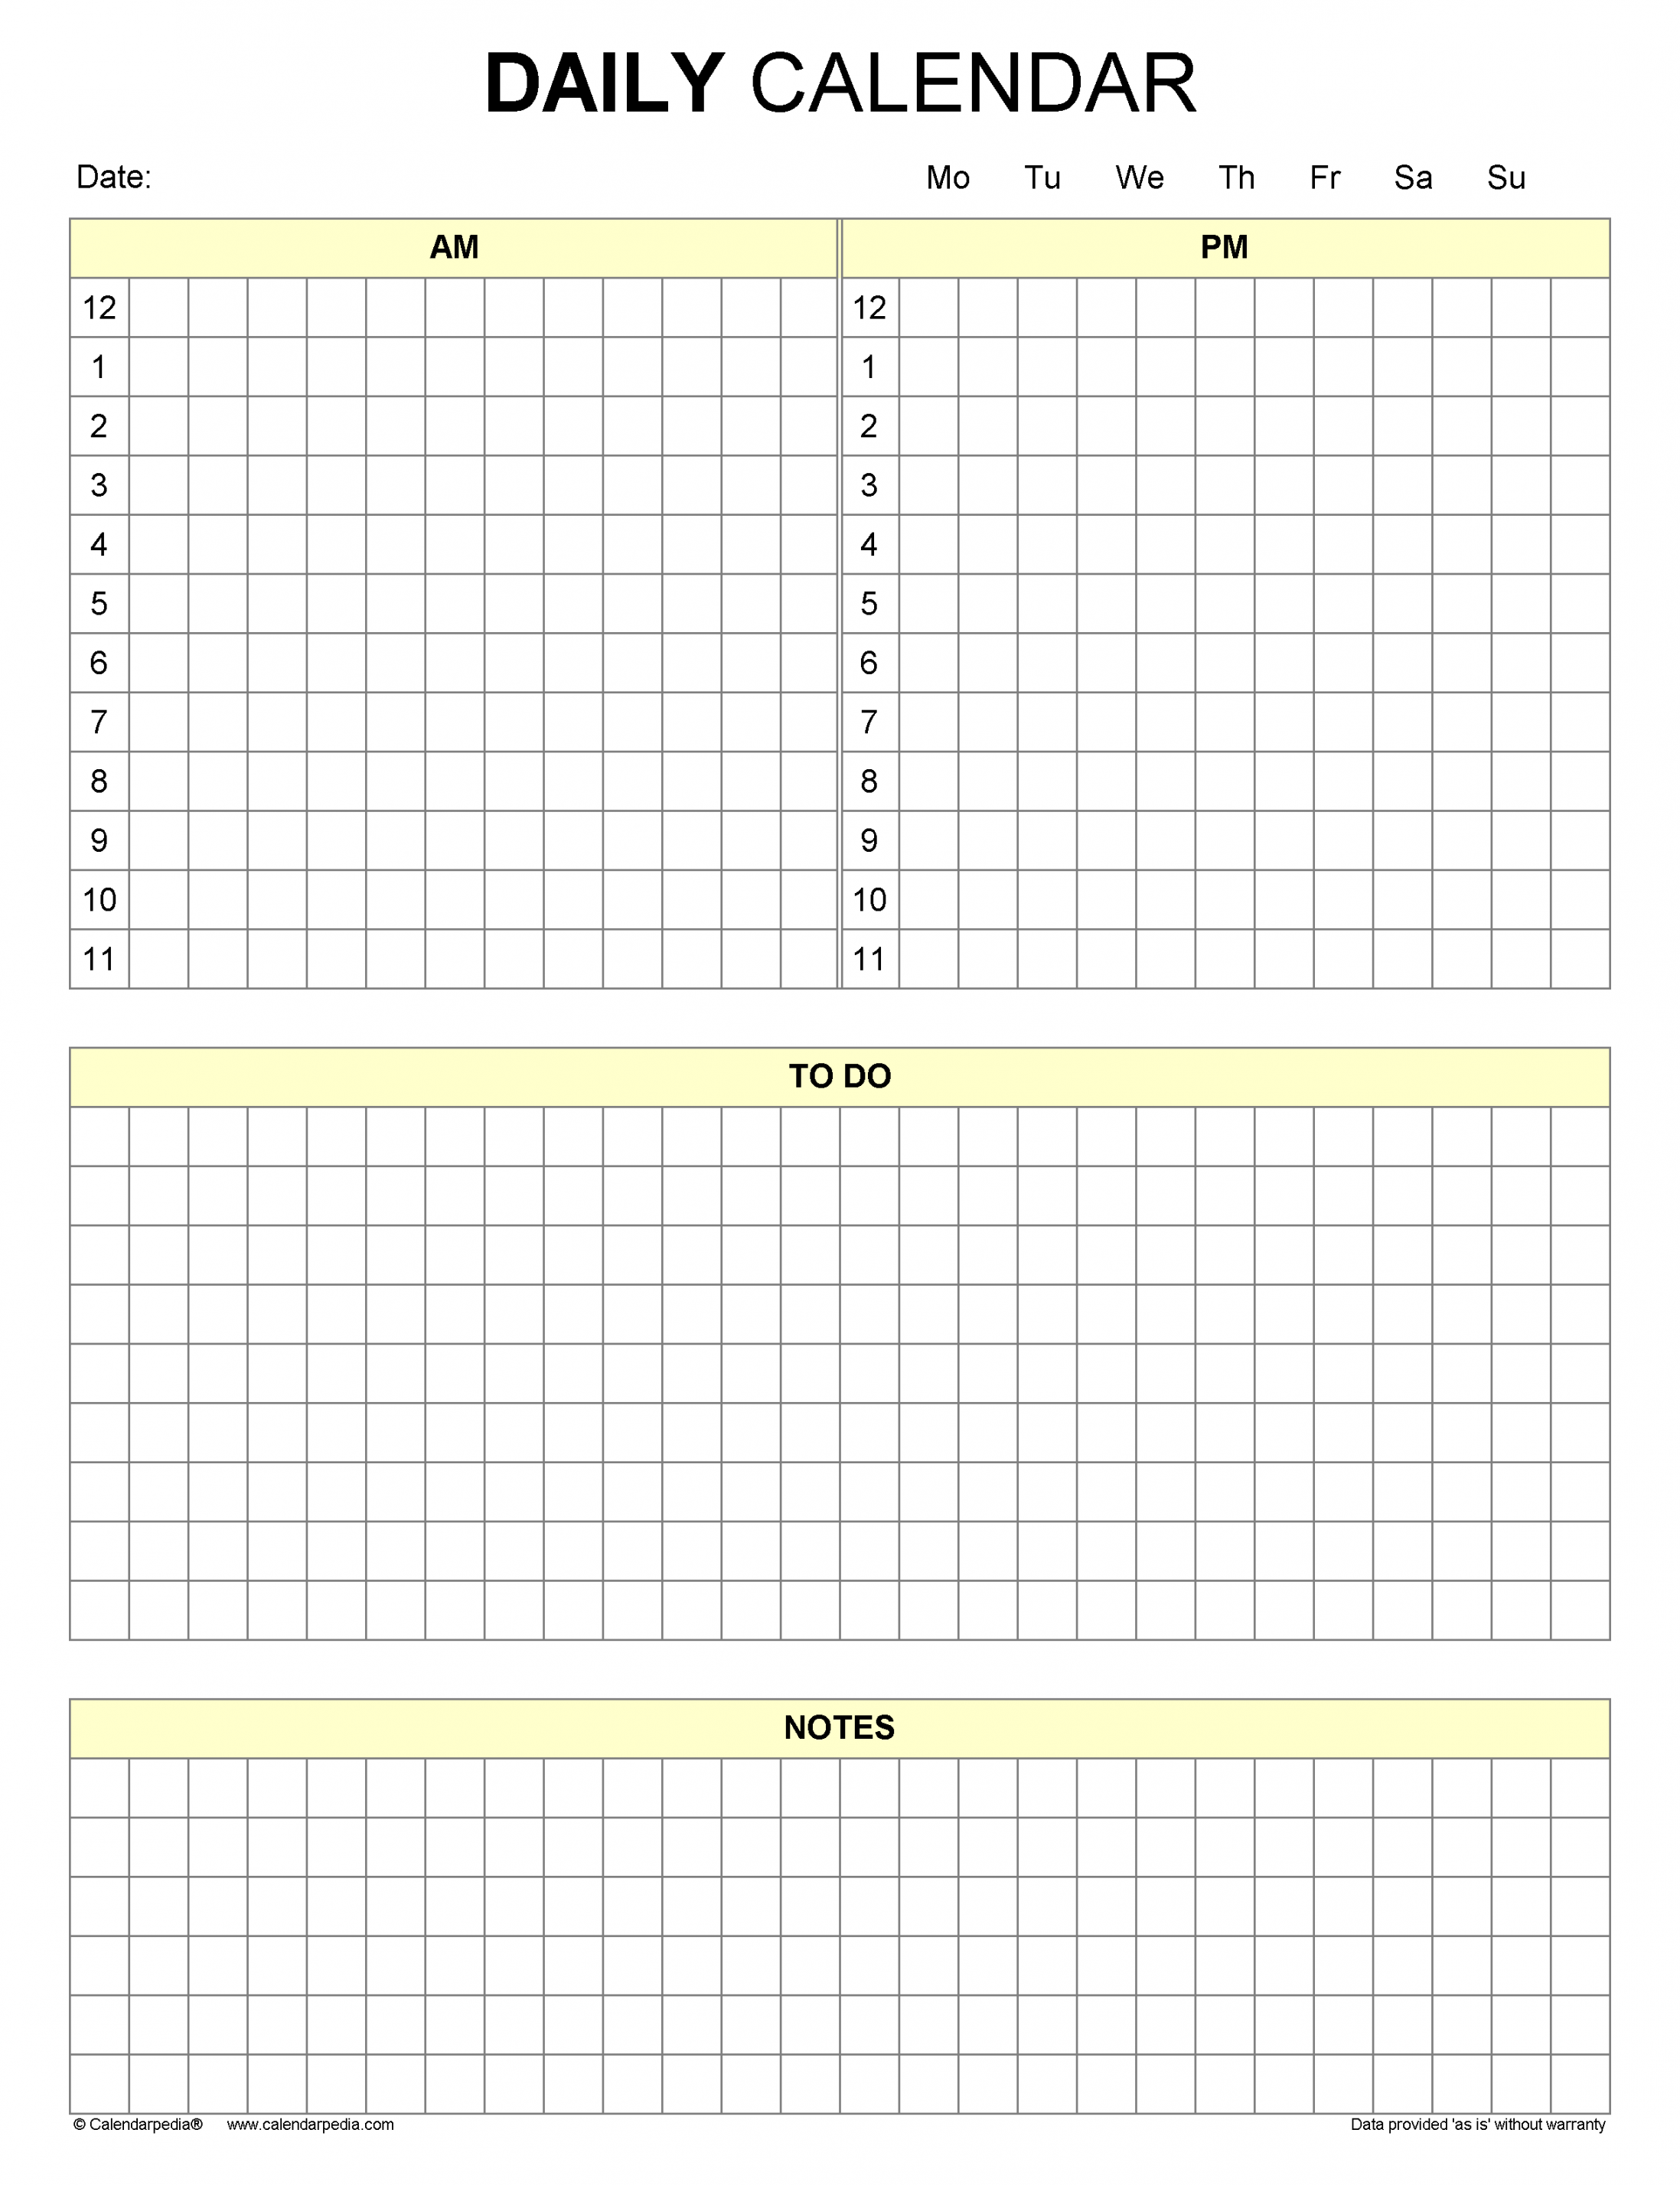 Free daily calendars in PDF format - + templates